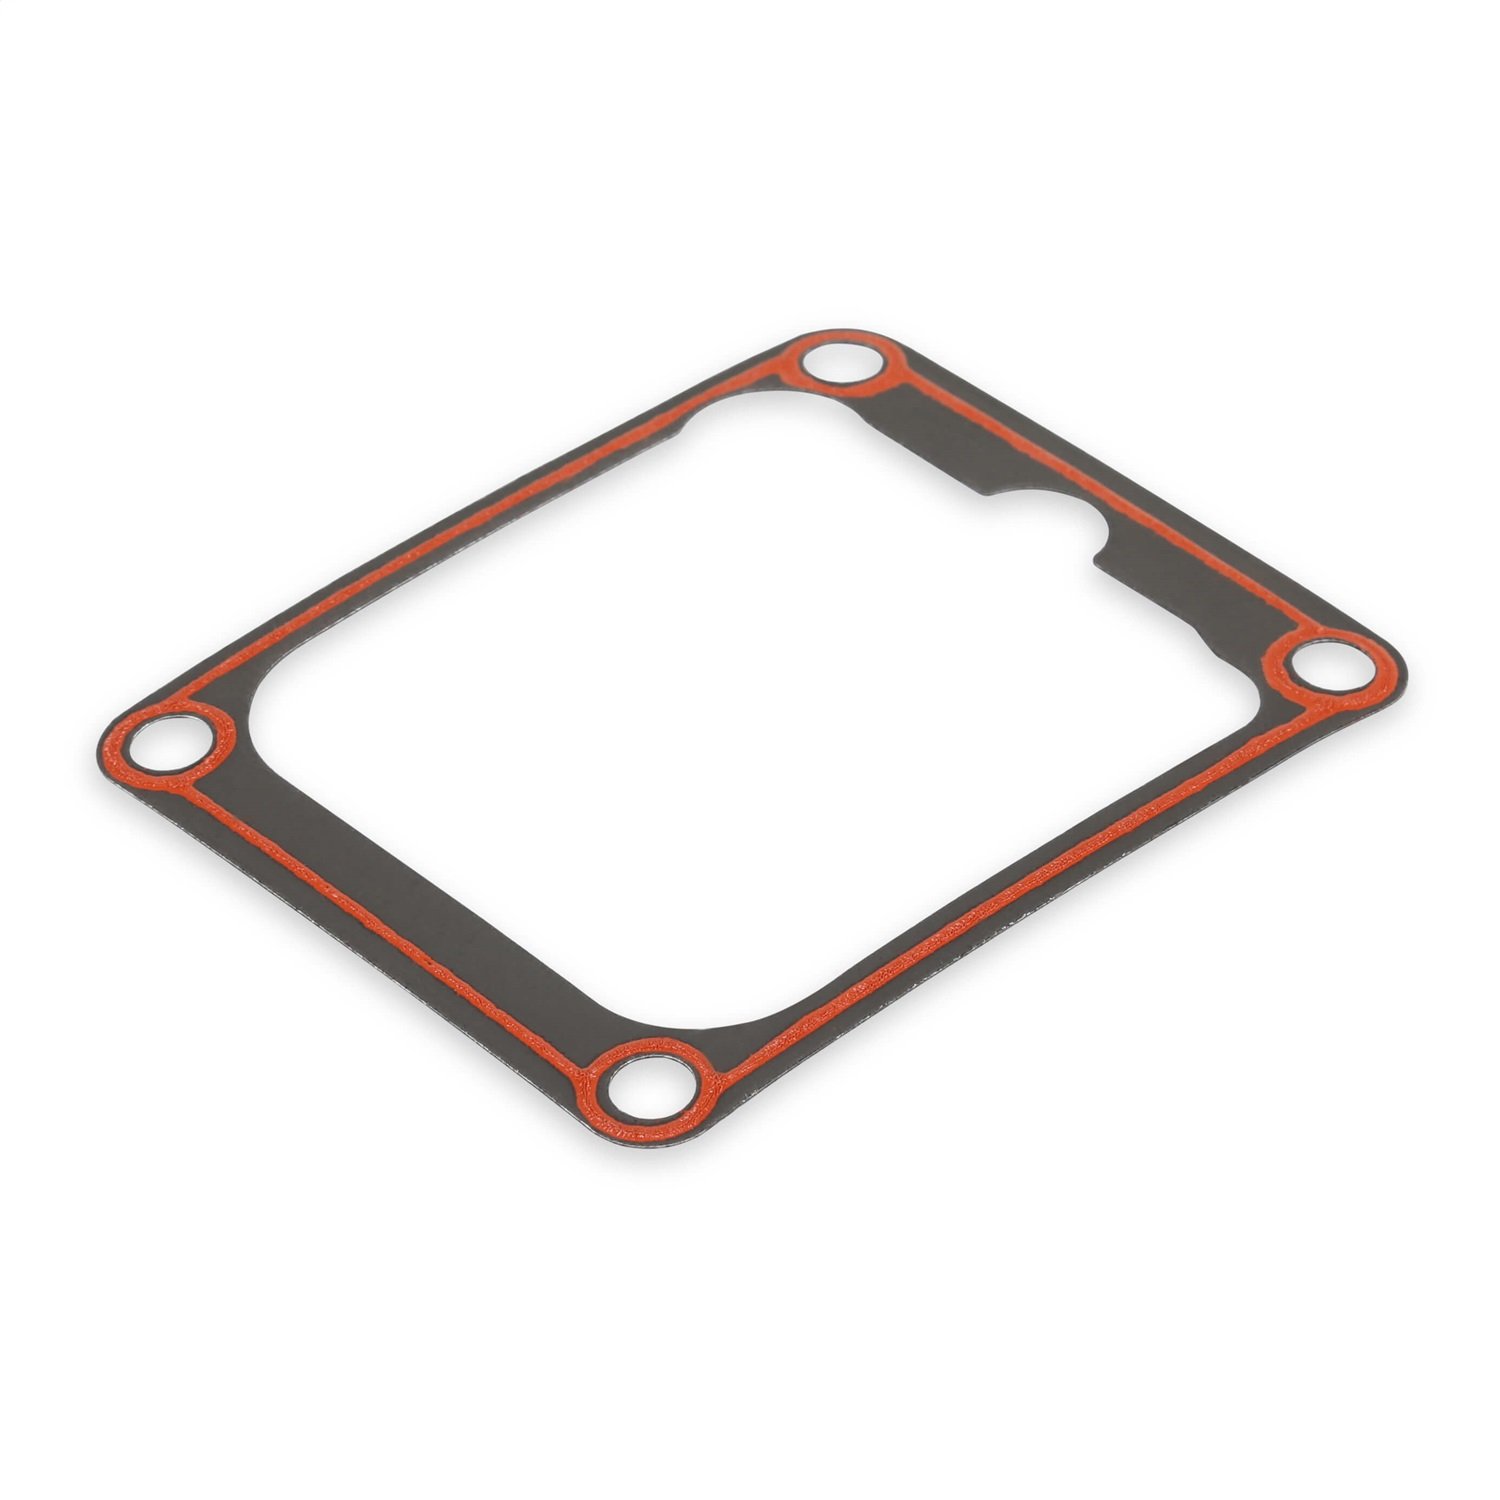 T56 FRONT SHIFTER GASKET